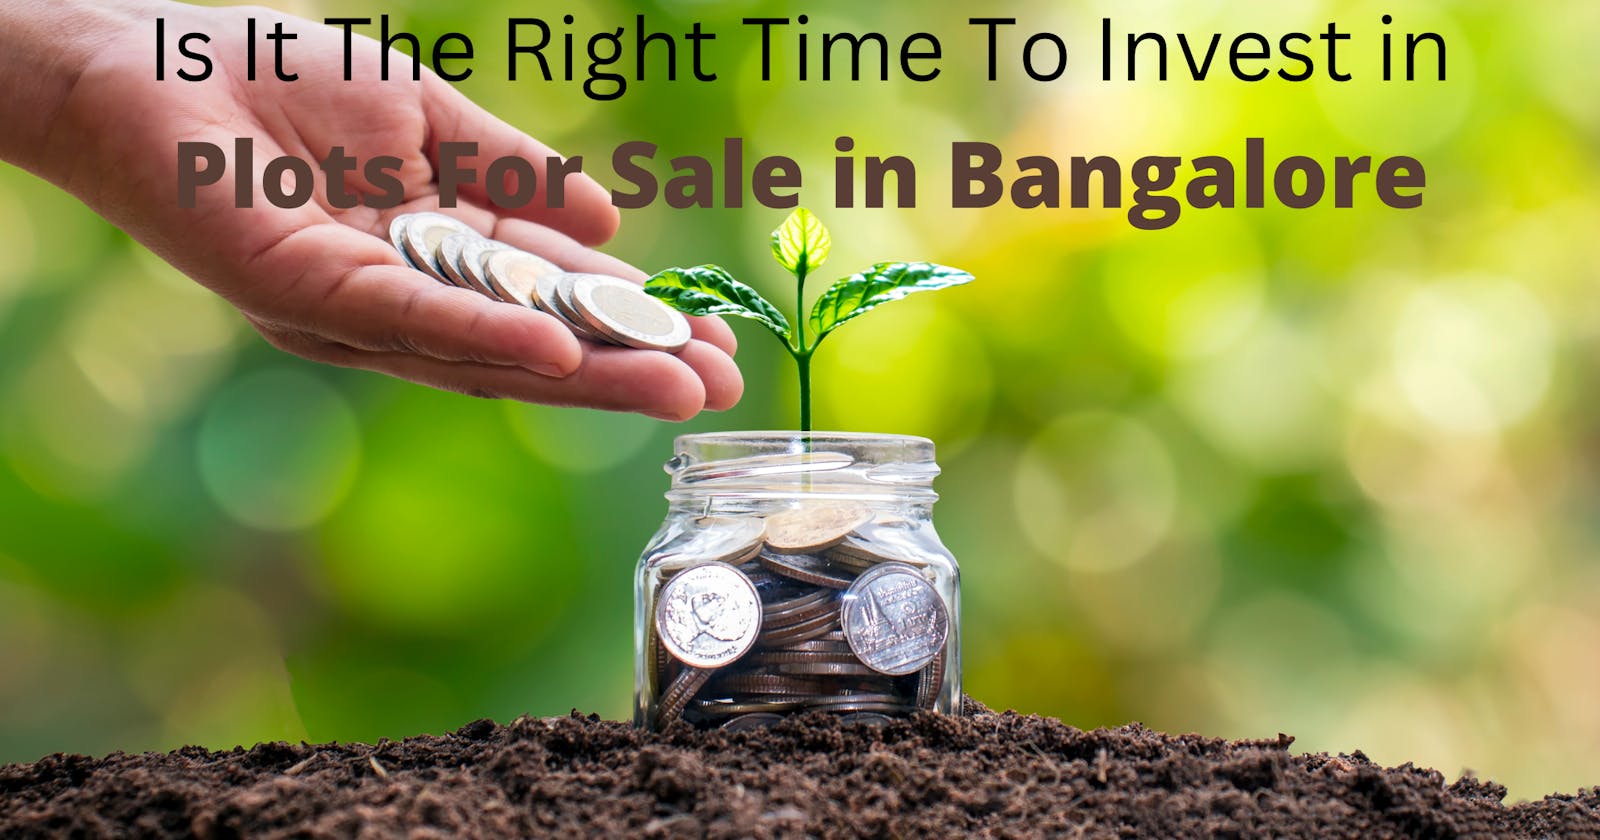 Is It The Right Time To Invest in Plots For Sale in Bangalore